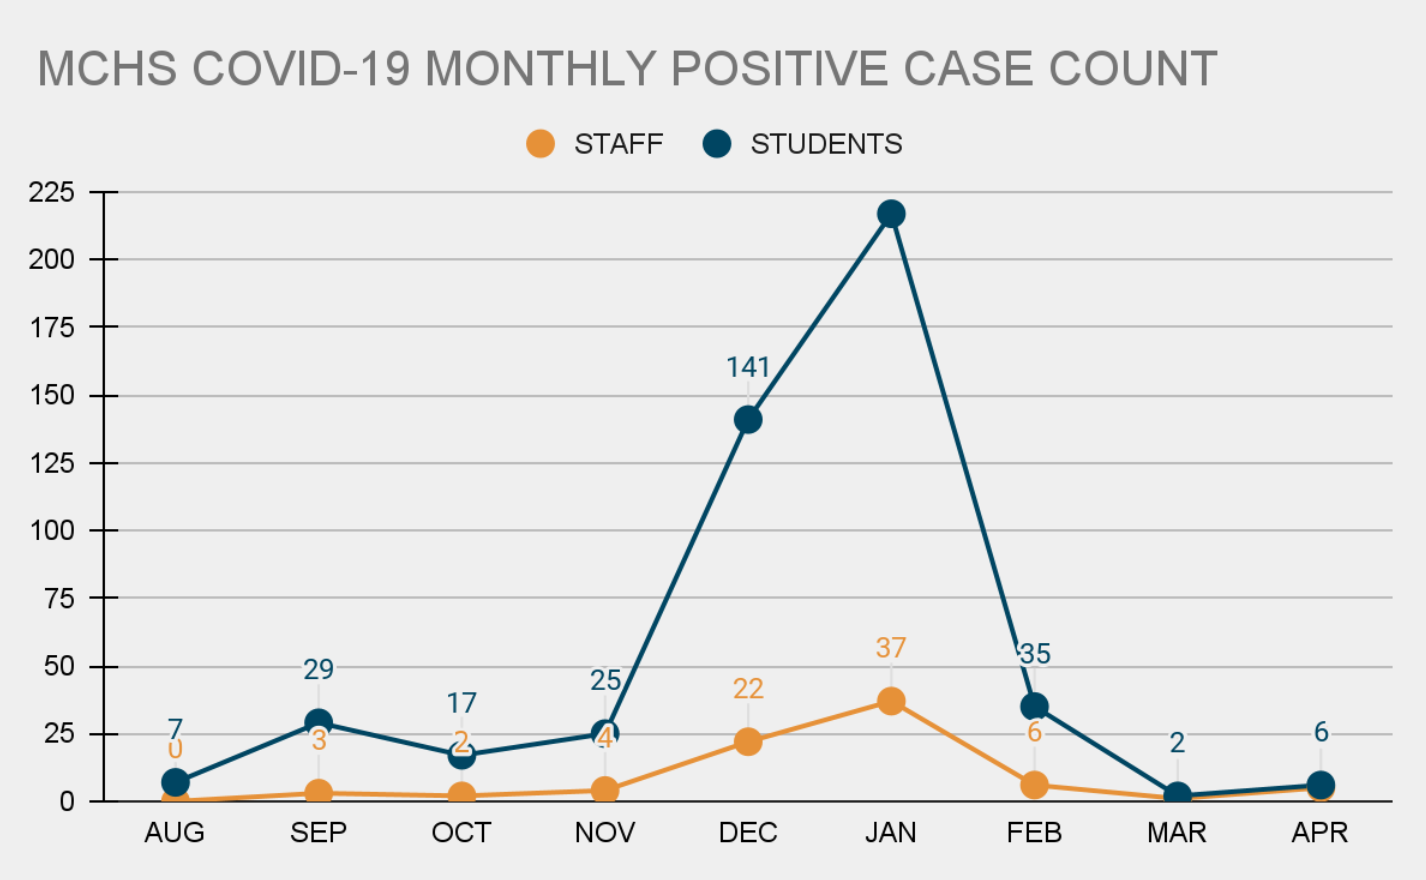 Monthly case count